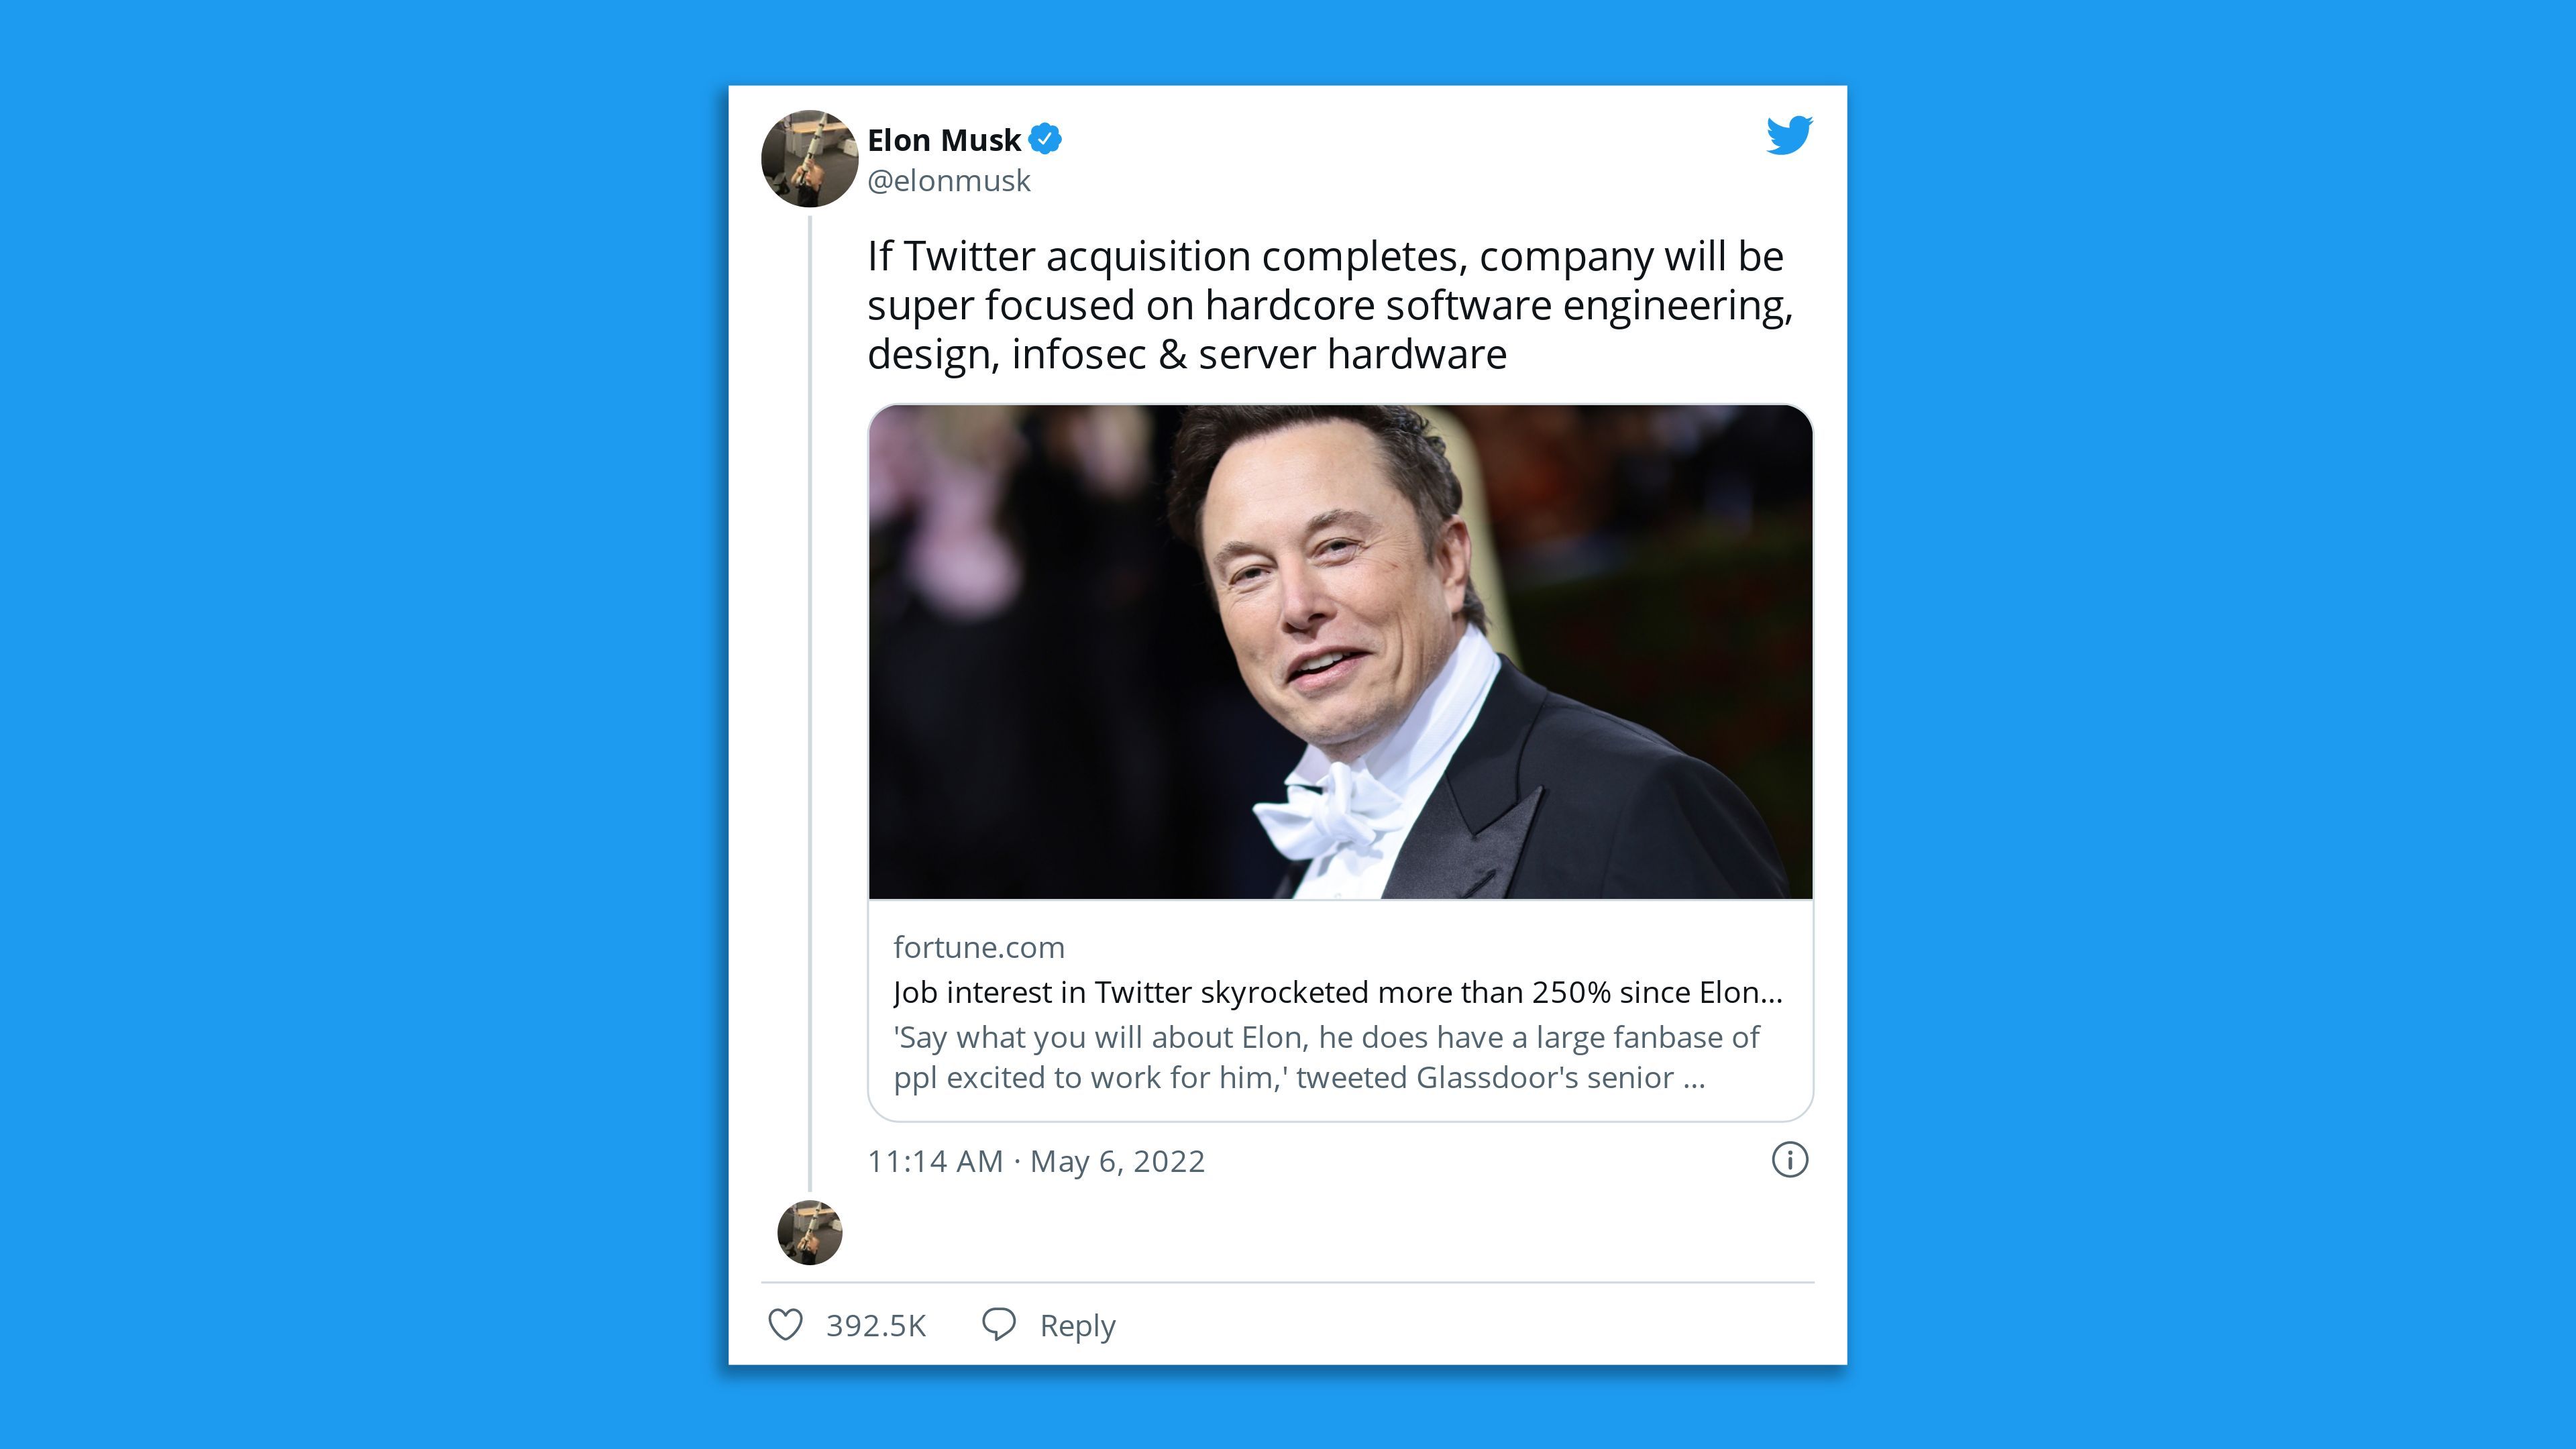 Musk tweet about "if" the deal happens